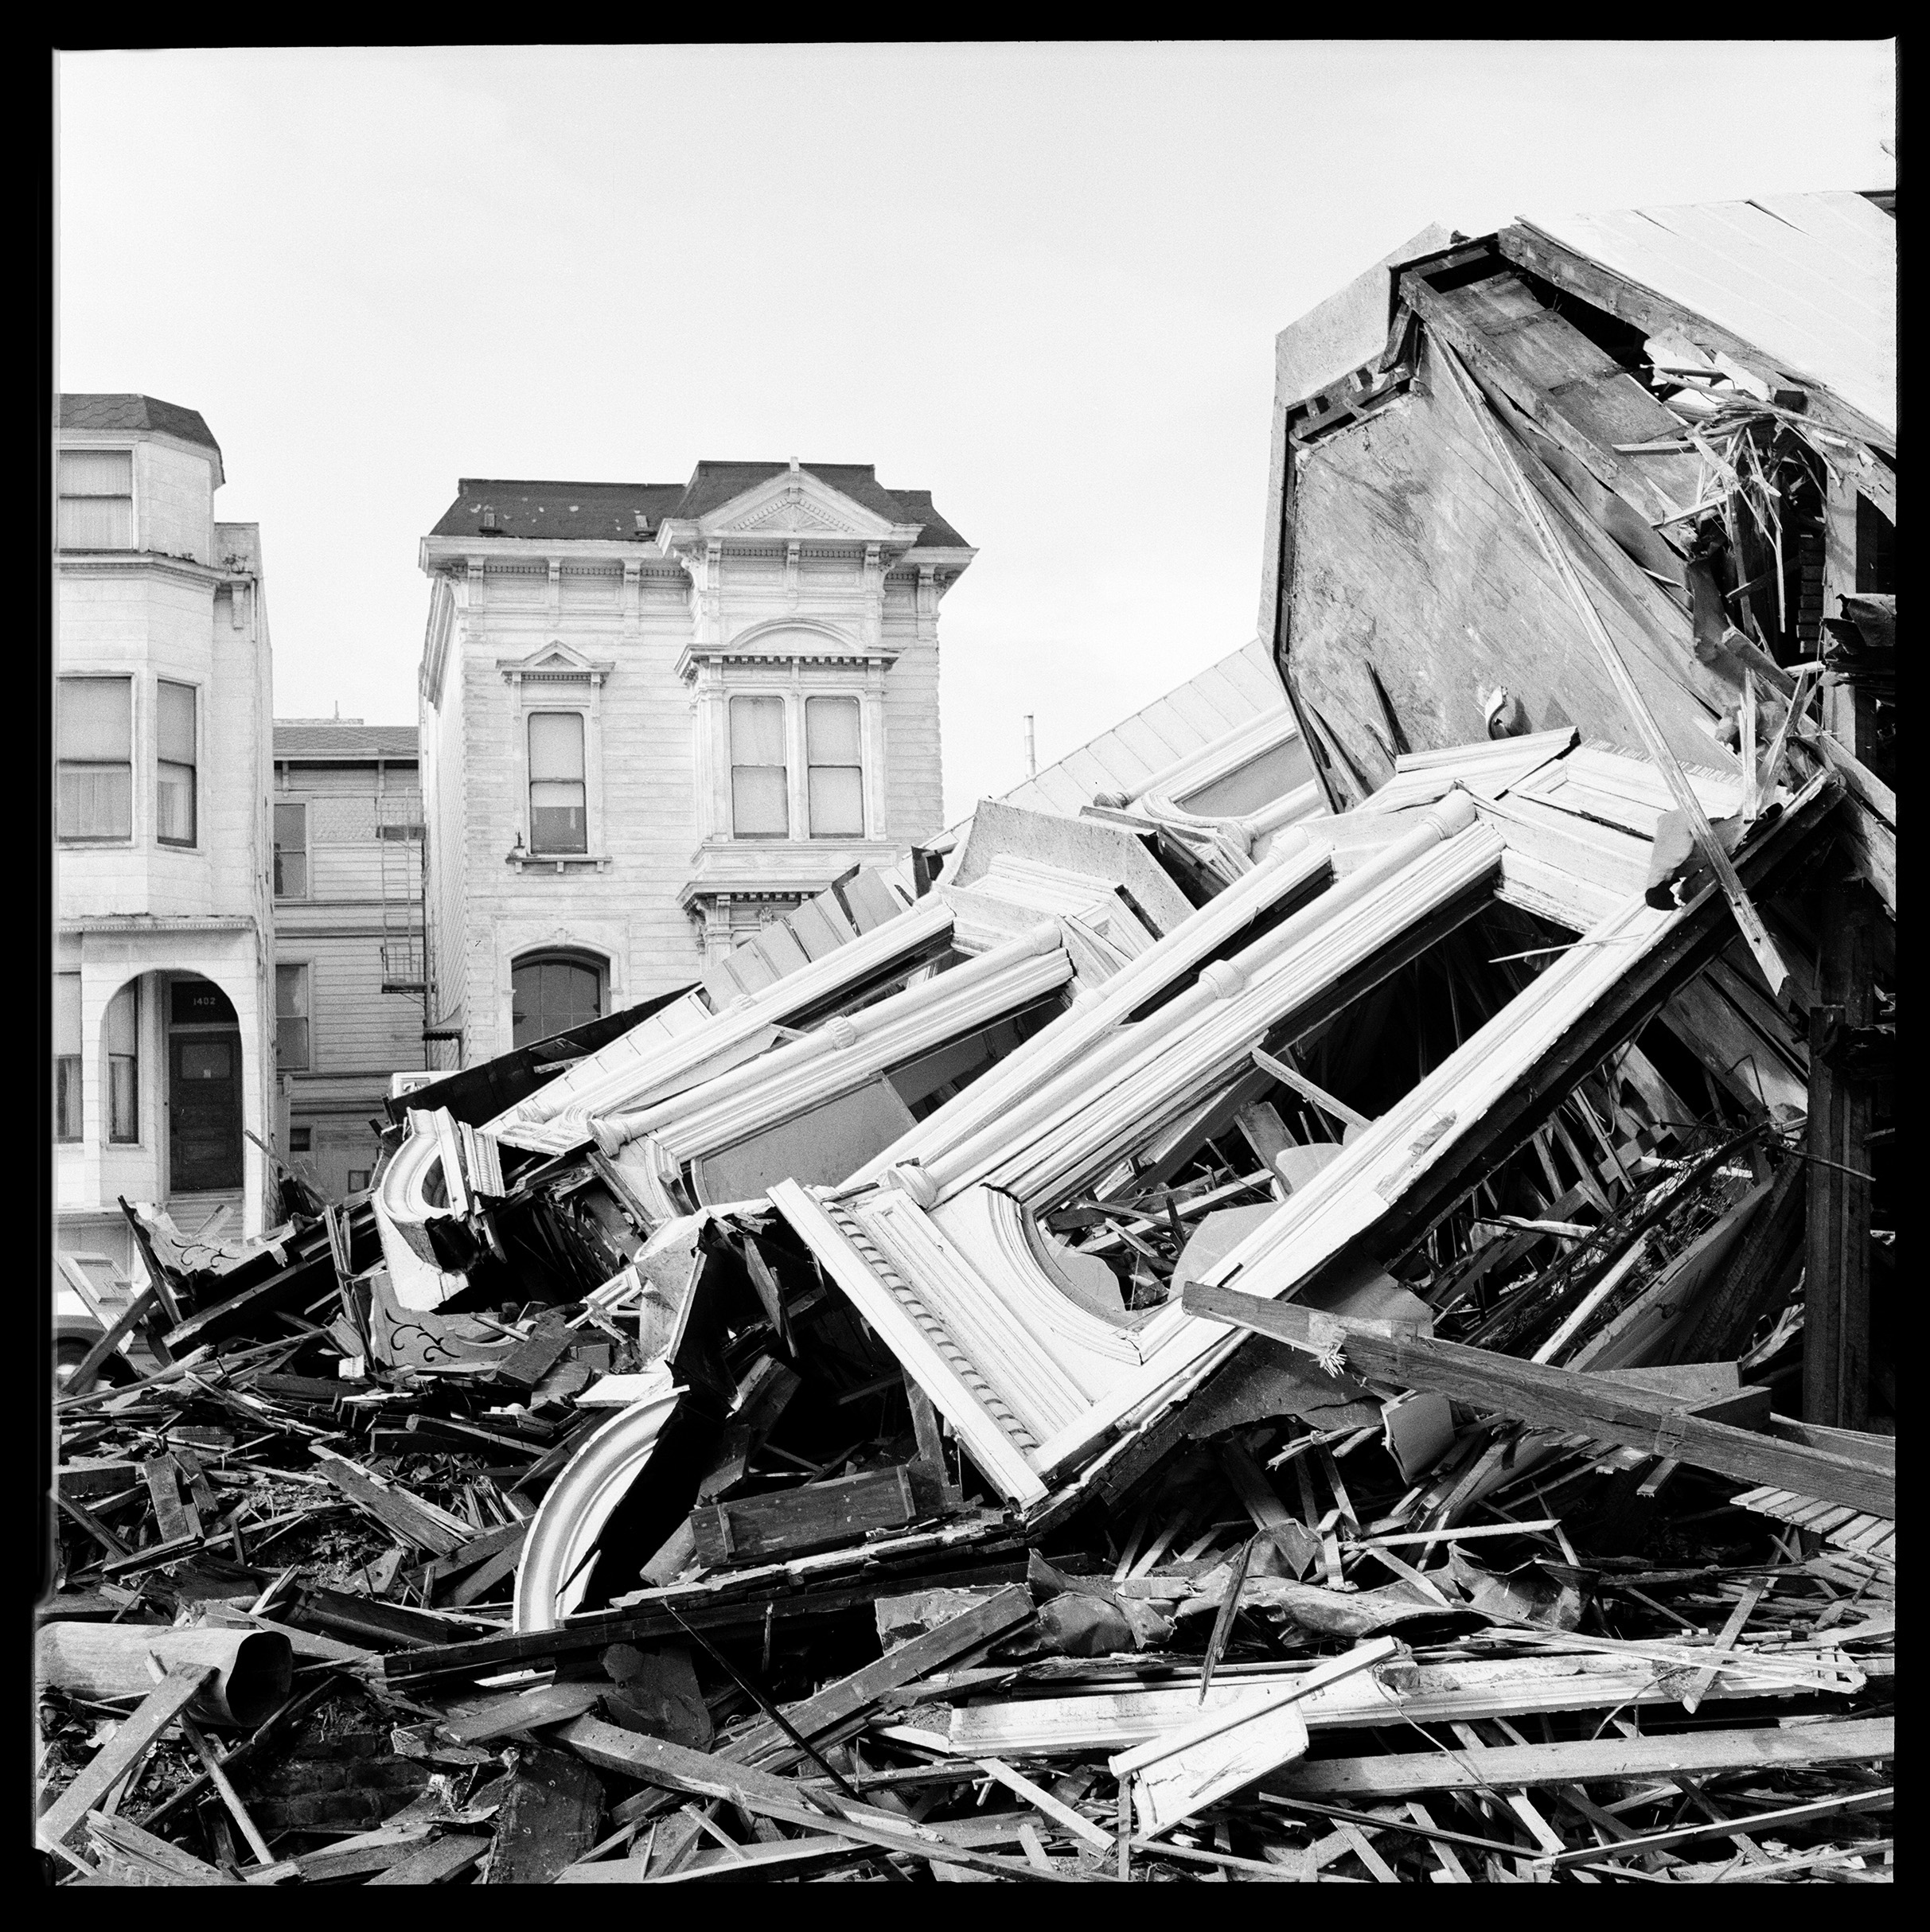 A black and white photo of destroyed wooden structures in a heap, with intact Victorian buildings in the background.